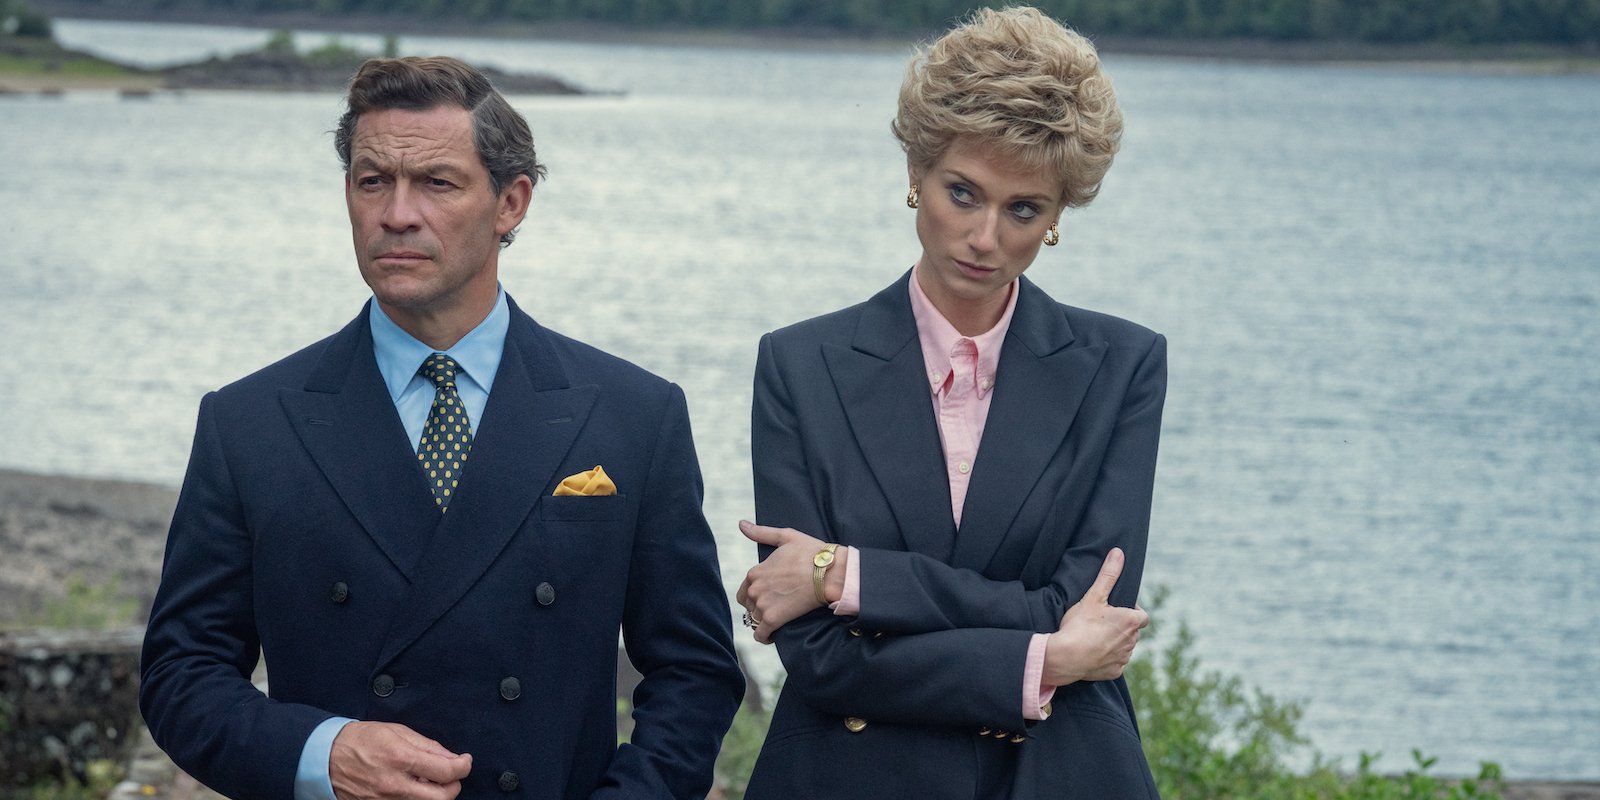 'The Crown' Season 5: Princess Diana (Elizabeth Debicki) stands with her arms folded next to Prince Charles (Dominic West)